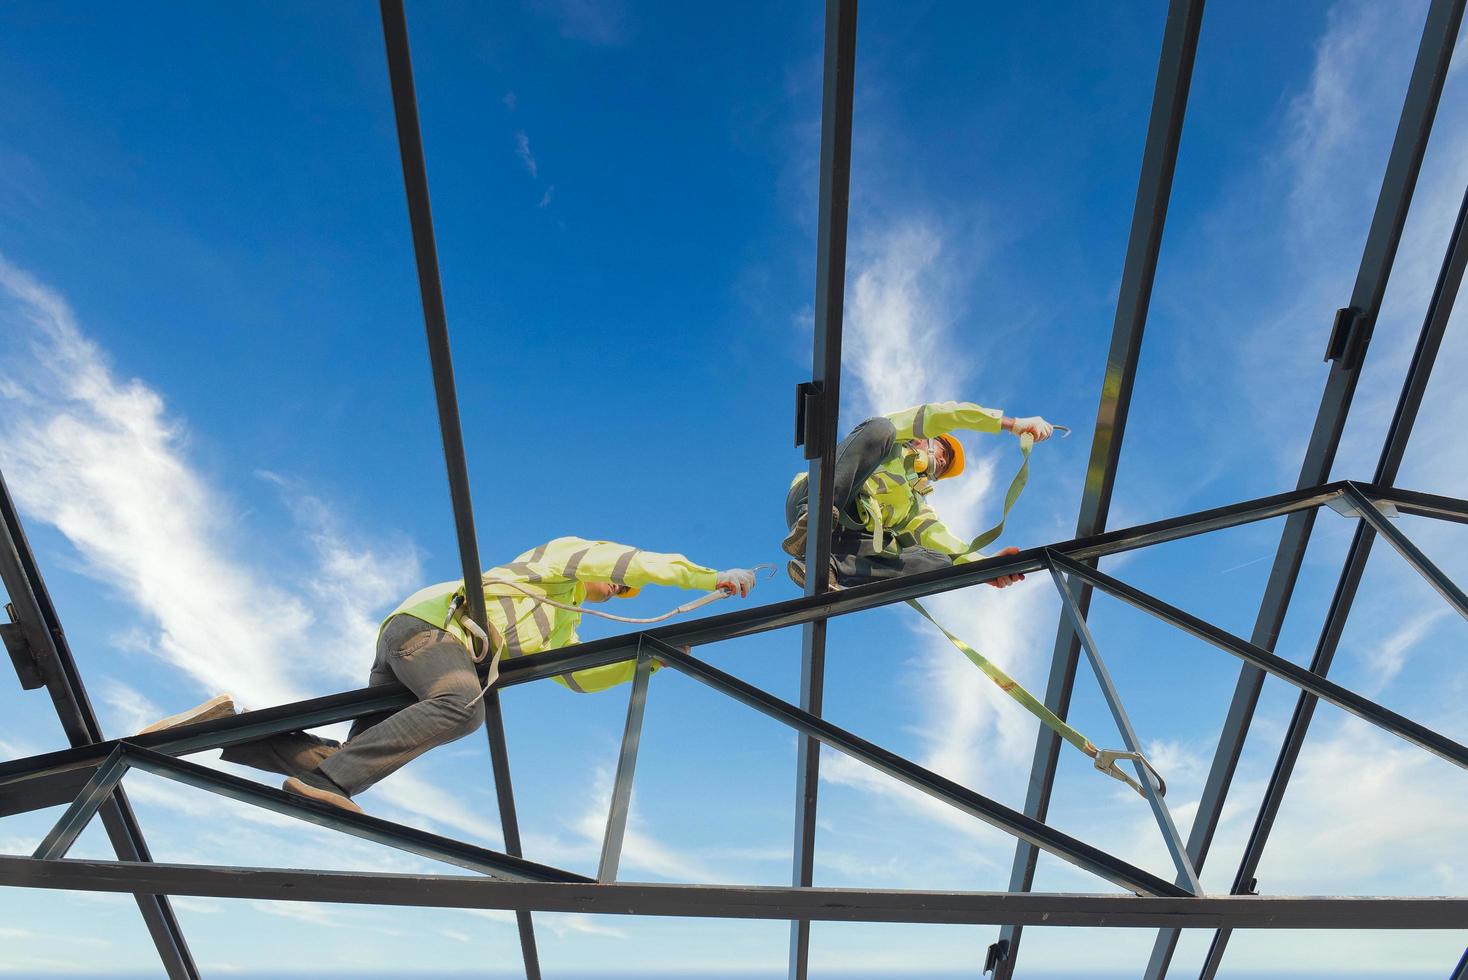 https://static.vecteezy.com/system/resources/previews/010/508/012/non_2x/construction-workers-wear-safety-harnesses-and-safety-harnesses-working-on-industrial-metal-roofs-free-photo.jpg